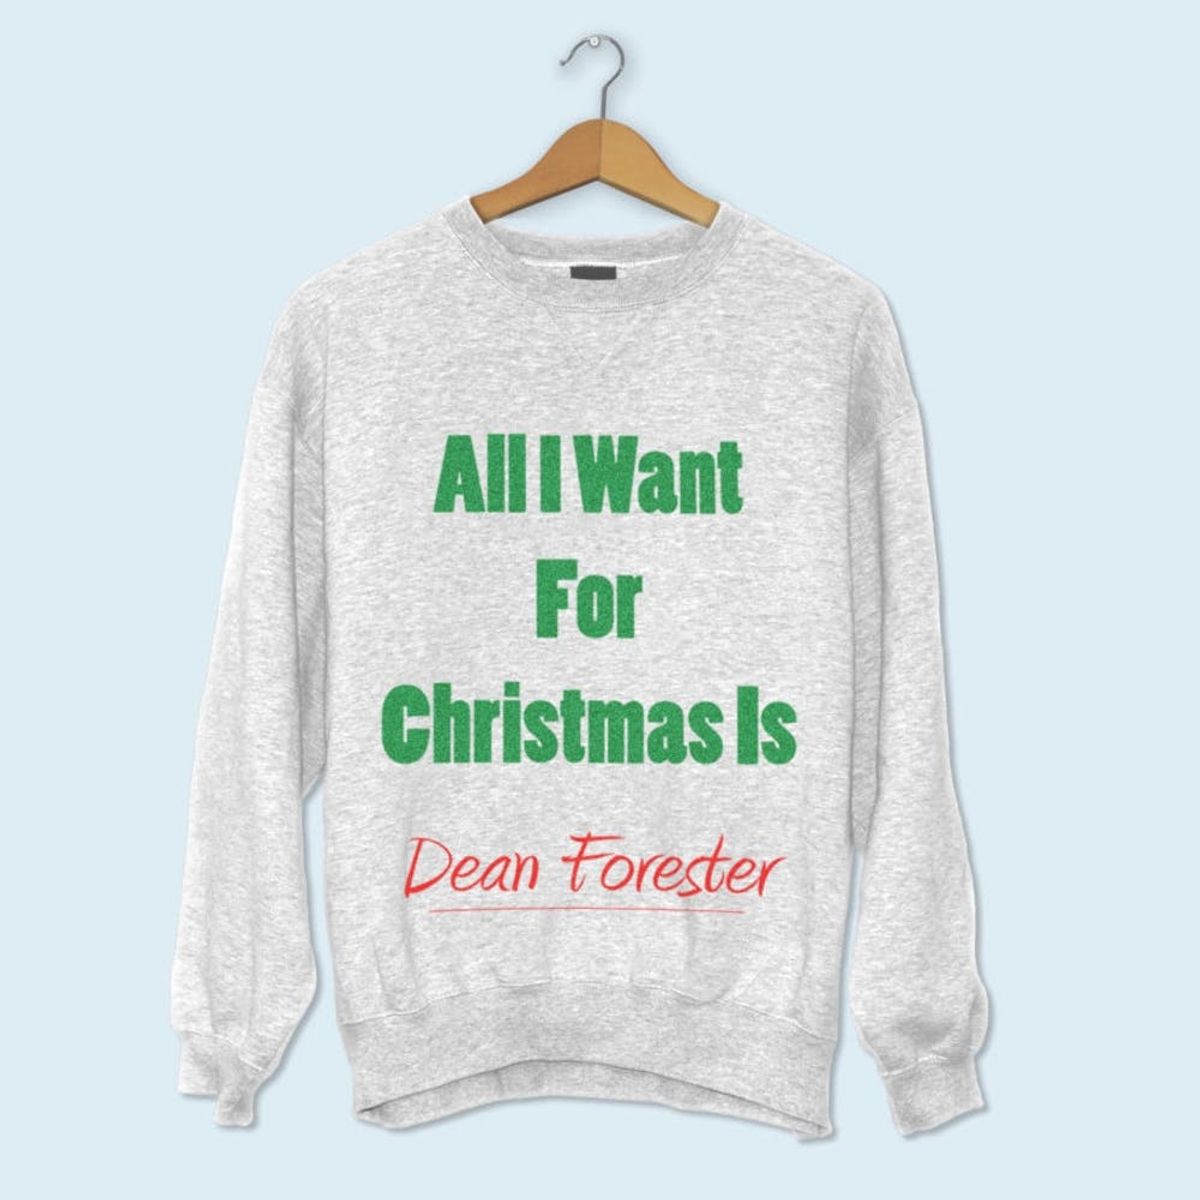 11 Essentials You Need for a Very Merry Gilmore Girls-Inspired Christmas